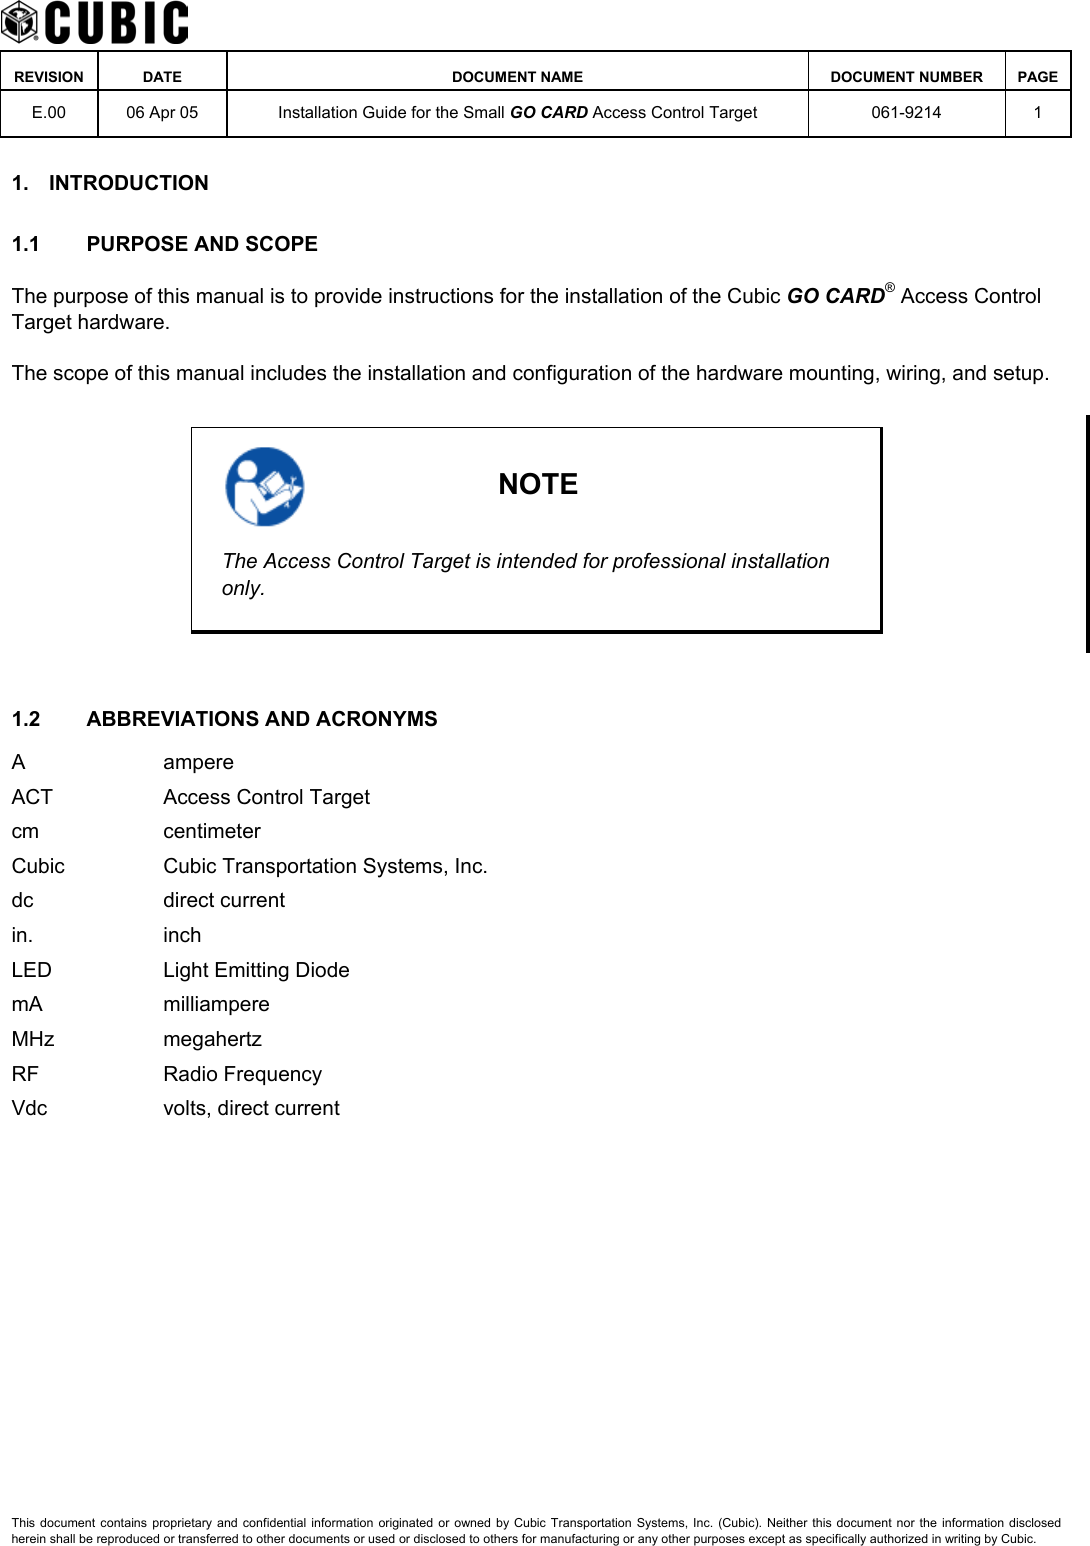    REVISION DATE  DOCUMENT NAME  DOCUMENT NUMBER  PAGE  E.00  06 Apr 05  Installation Guide for the Small GO CARD Access Control Target  061-9214 1  1. INTRODUCTION 1.1  PURPOSE AND SCOPE The purpose of this manual is to provide instructions for the installation of the Cubic GO CARD® Access Control Target hardware. The scope of this manual includes the installation and configuration of the hardware mounting, wiring, and setup.   NOTE The Access Control Target is intended for professional installation only.  1.2  ABBREVIATIONS AND ACRONYMS A ampere ACT  Access Control Target cm centimeter Cubic  Cubic Transportation Systems, Inc. dc direct current in. inch LED  Light Emitting Diode mA milliampere MHz megahertz RF Radio Frequency Vdc  volts, direct current This document contains proprietary and confidential information originated or owned by Cubic Transportation Systems, Inc. (Cubic). Neither this document nor the information disclosed herein shall be reproduced or transferred to other documents or used or disclosed to others for manufacturing or any other purposes except as specifically authorized in writing by Cubic. 